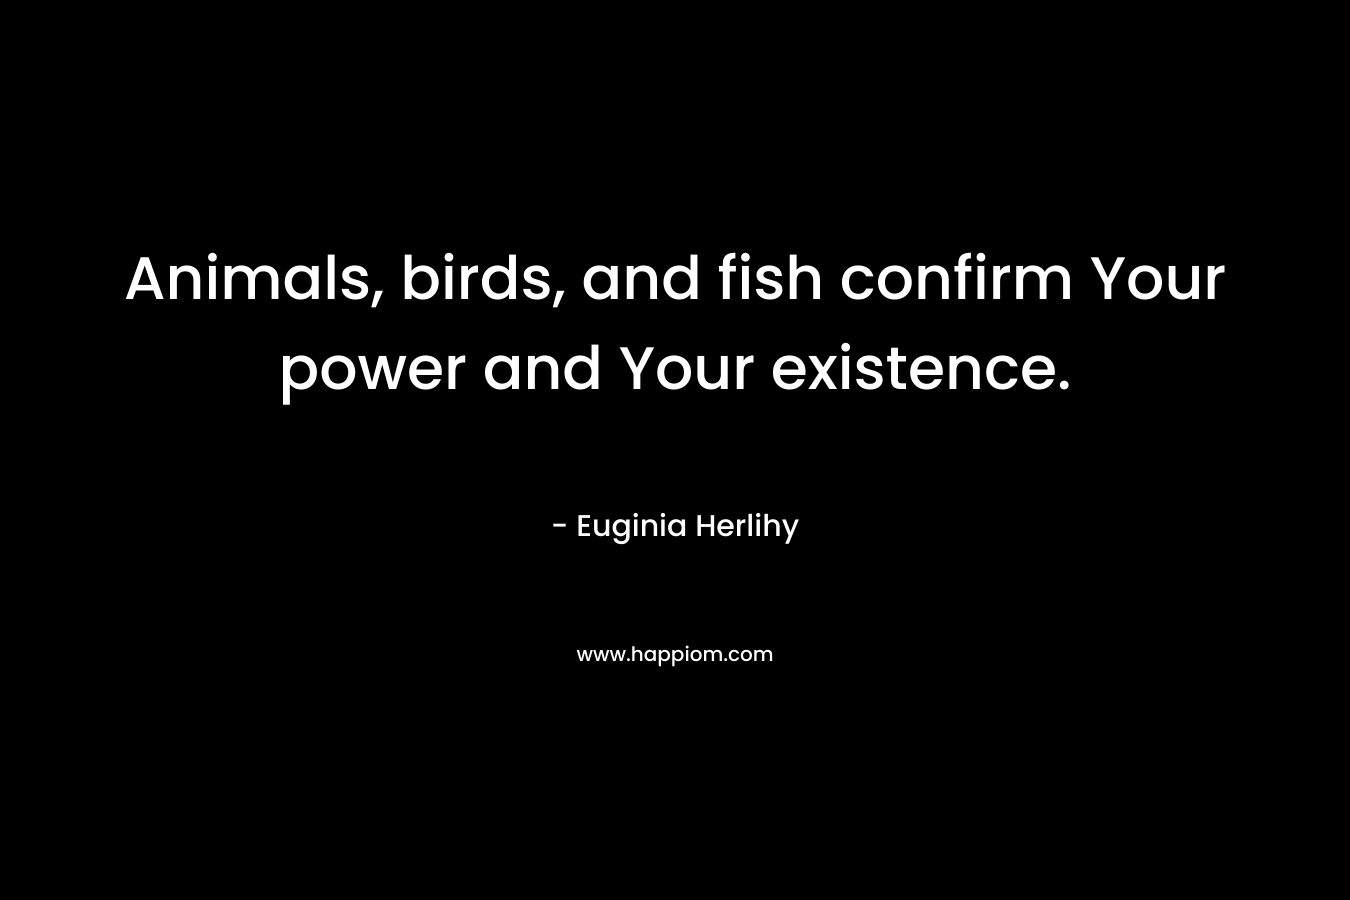 Animals, birds, and fish confirm Your power and Your existence.